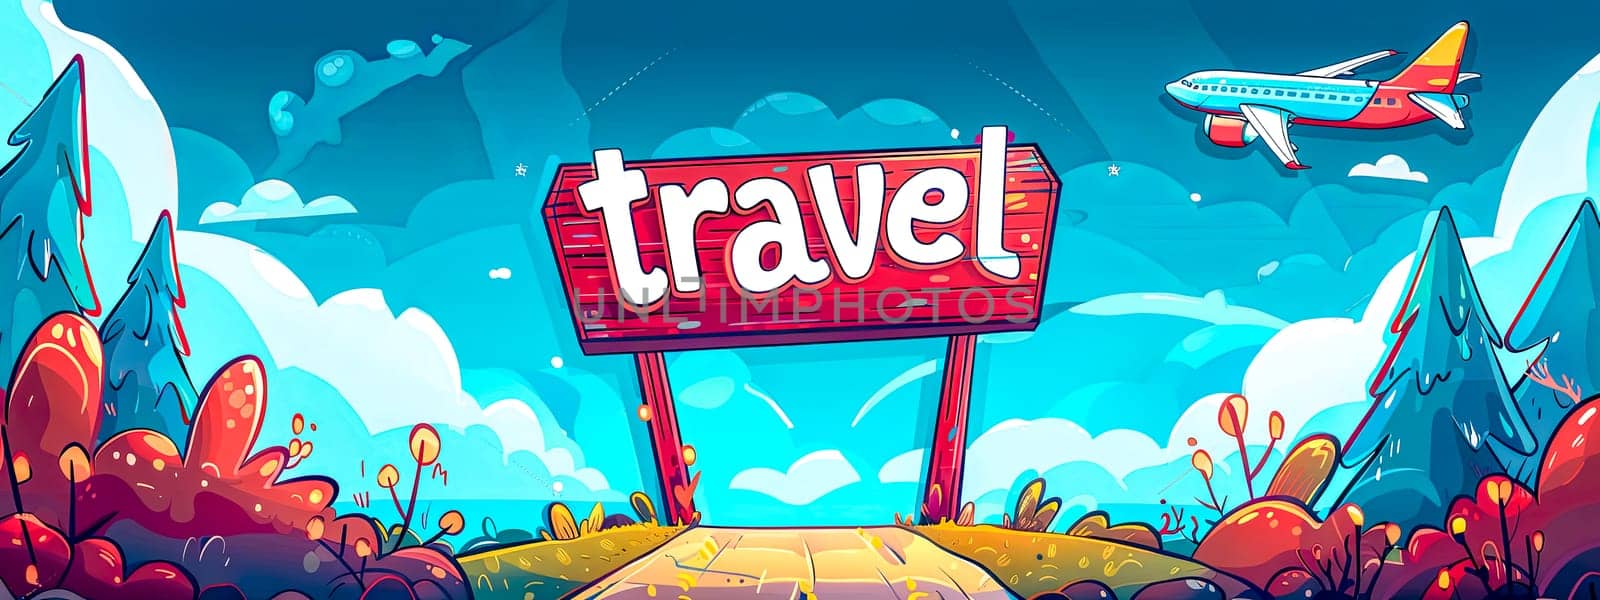 Vibrant cartoon travel billboard with plane and scenery by Edophoto